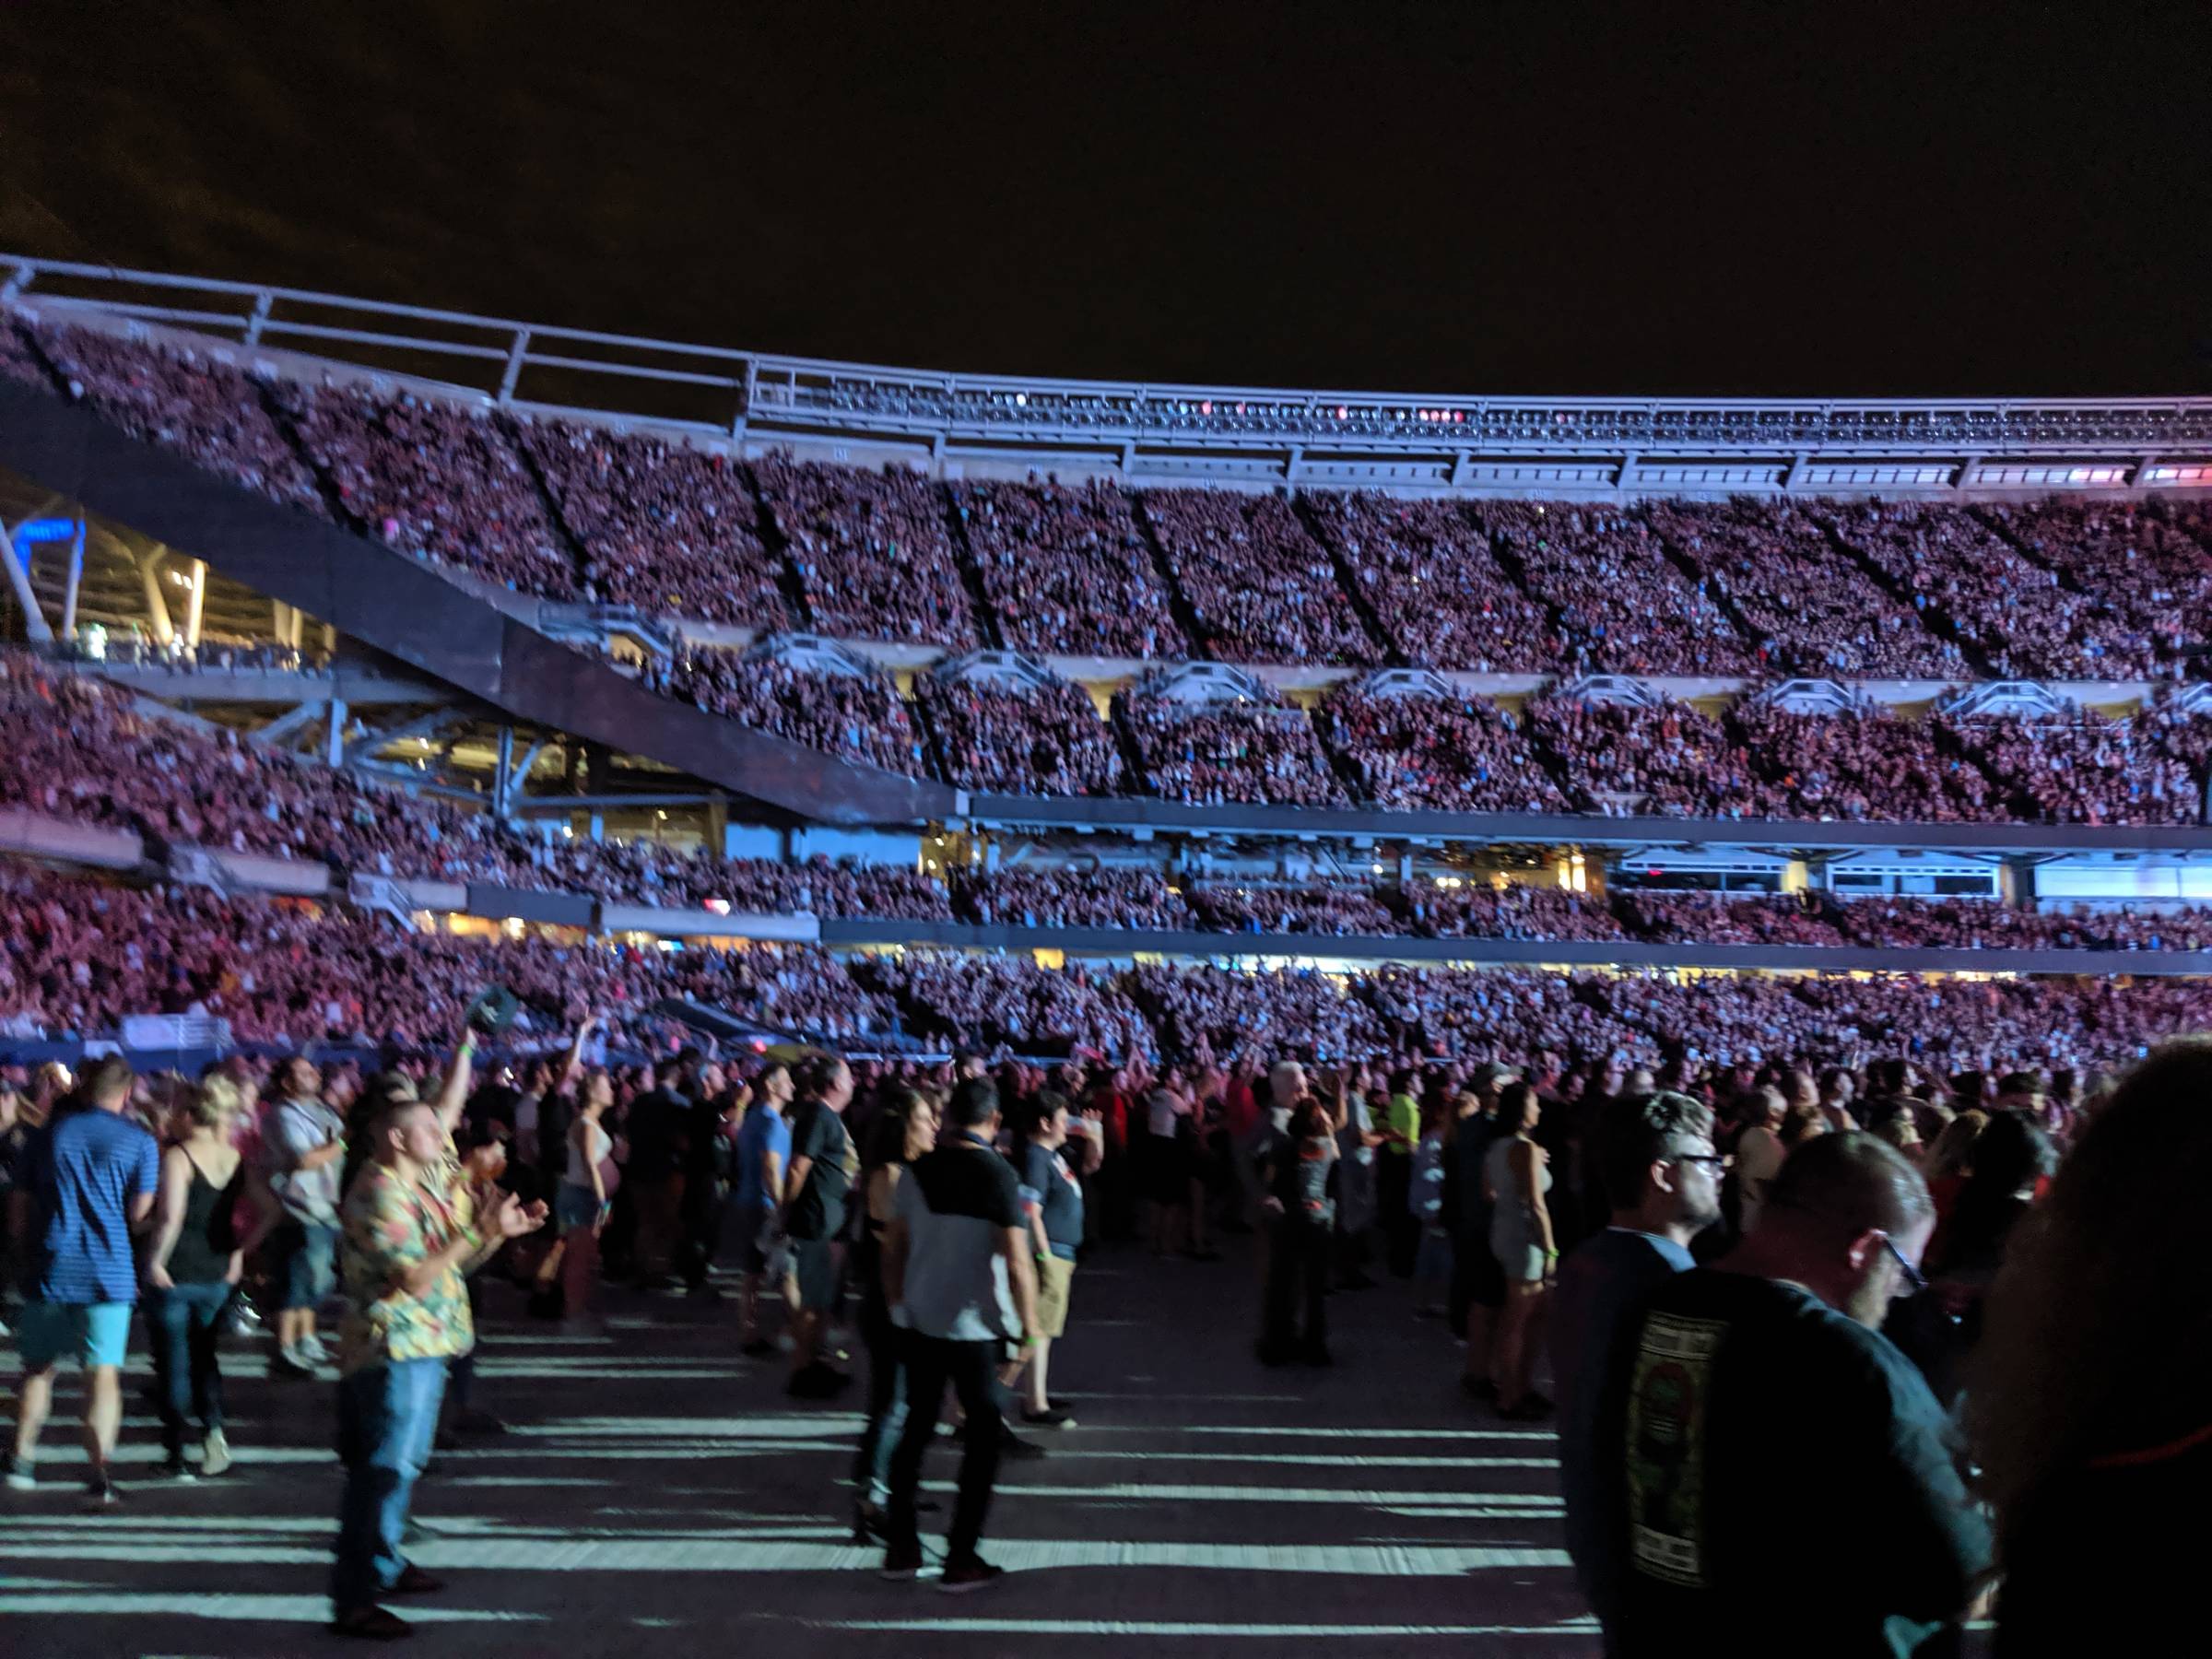 sold out soldier field for a concert